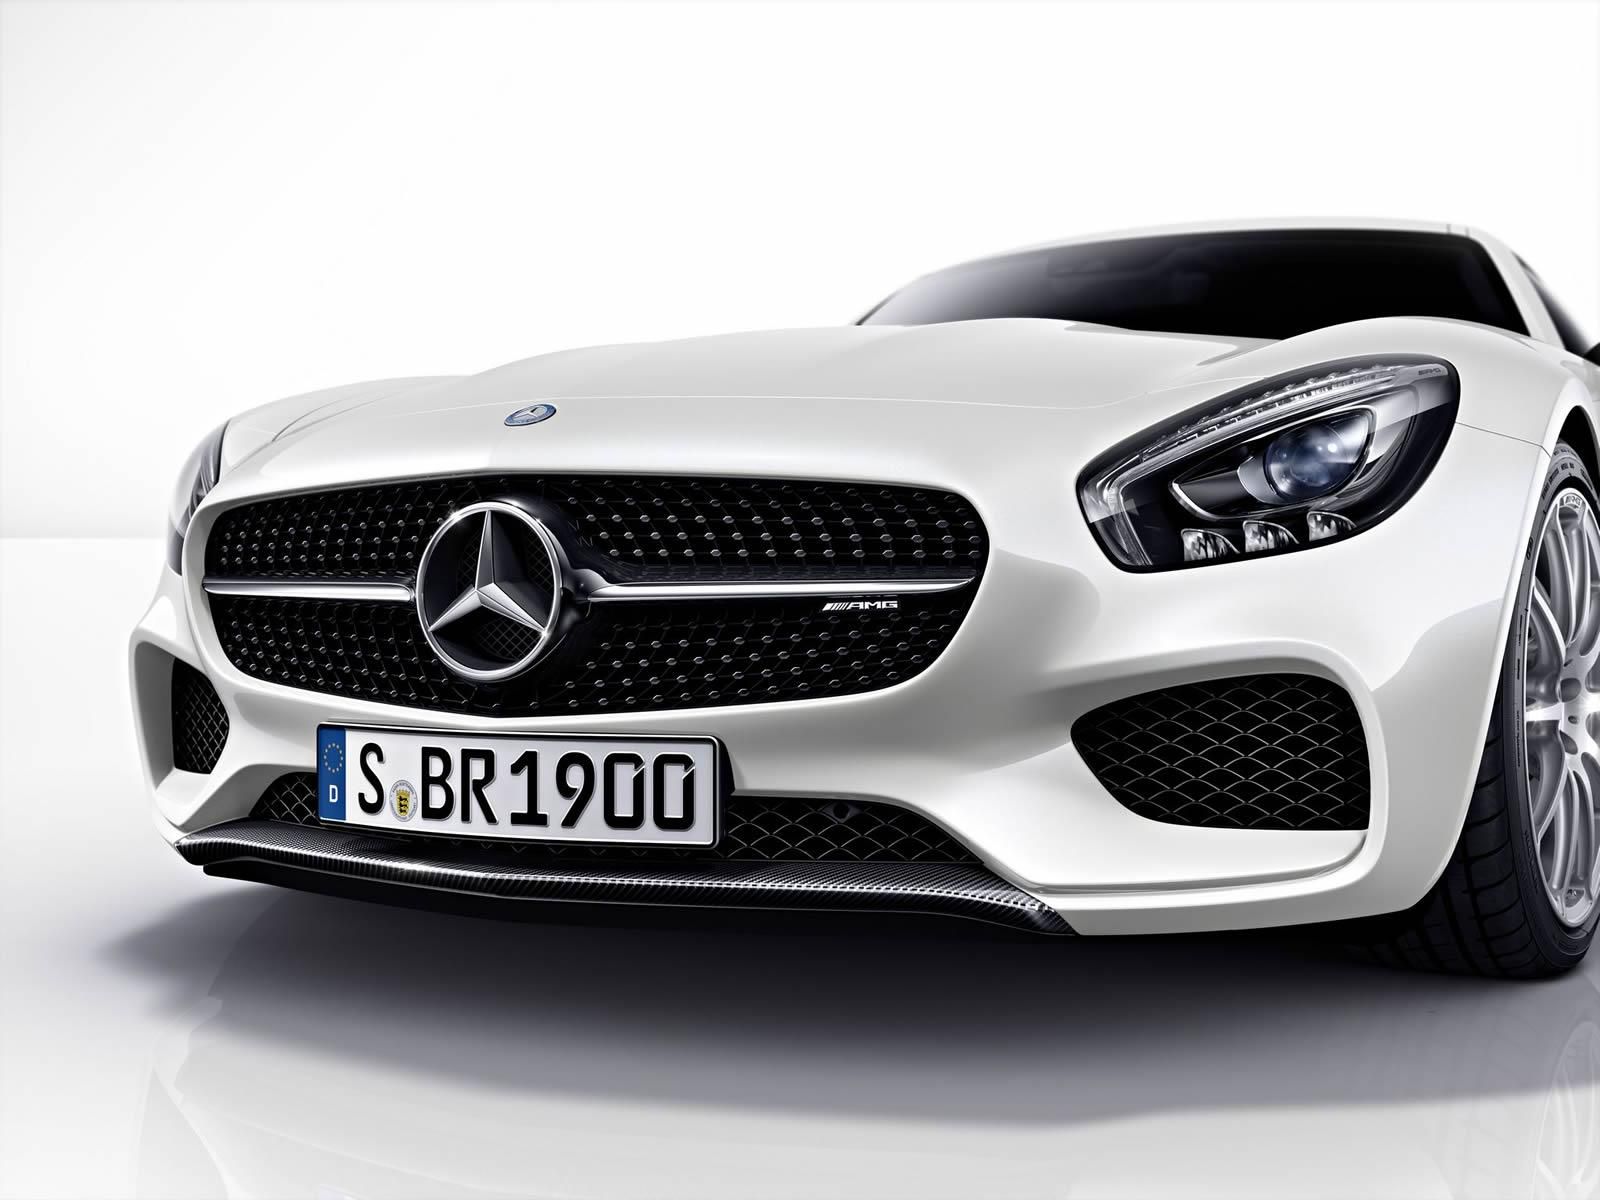 2015 Mercedes-AMG GT Carbon and Silver Chrome Packages